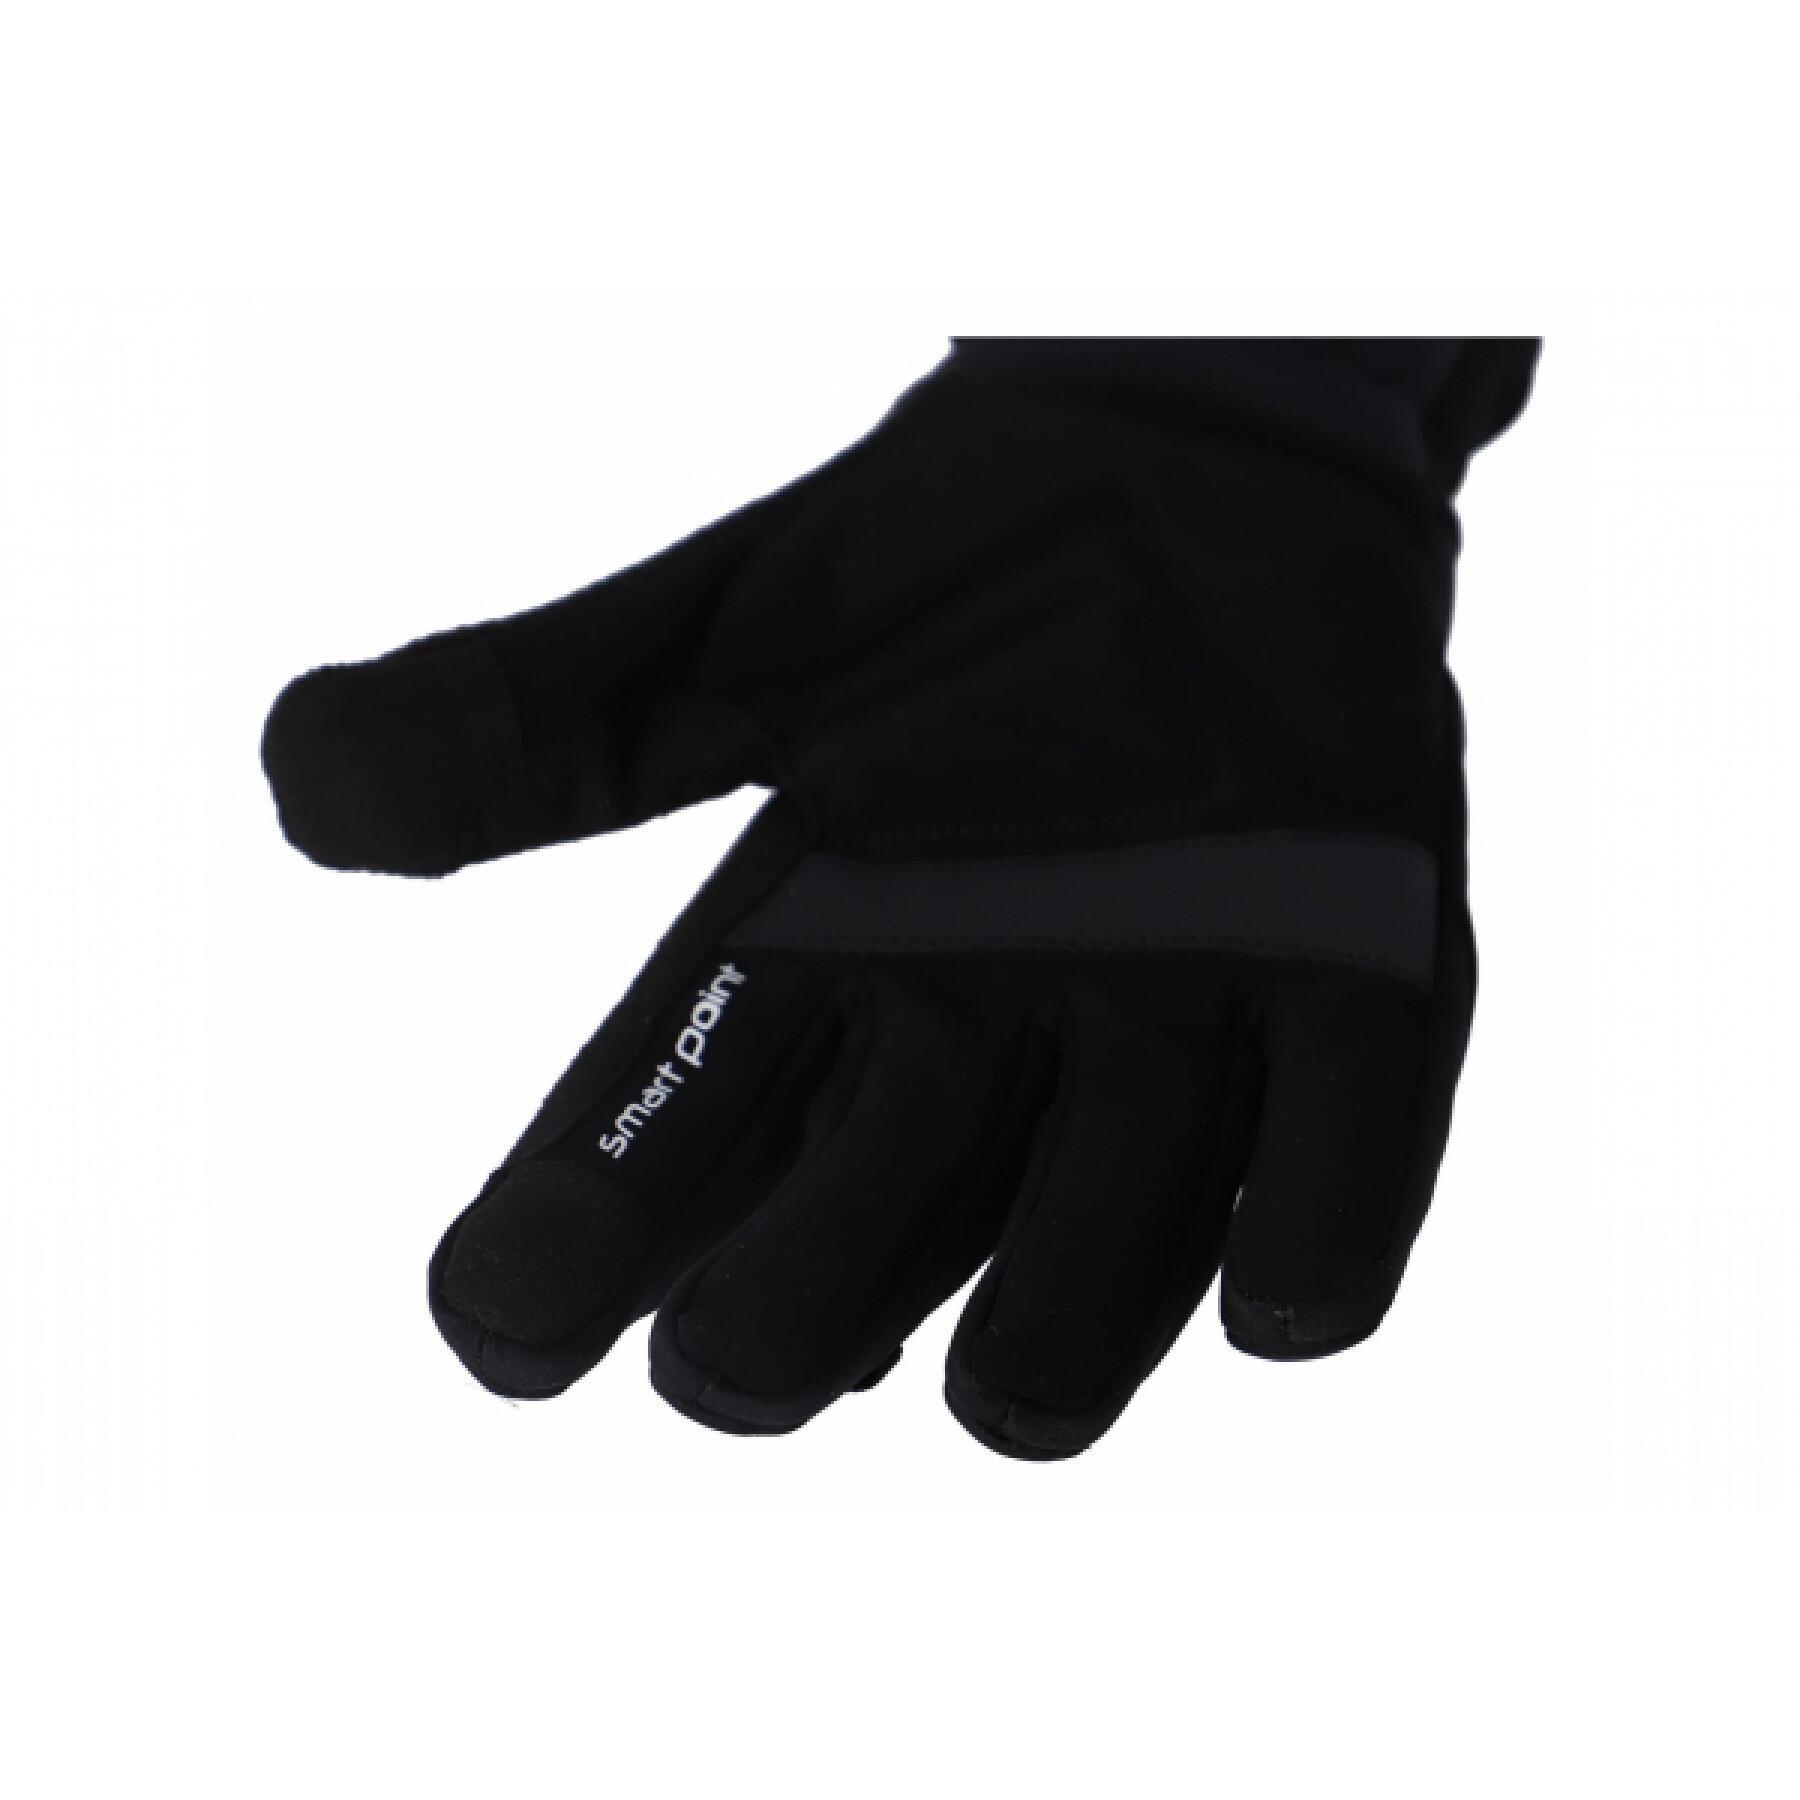 Long winter cycling gloves with rain protection on thumb and index fingers XLC CG-L17